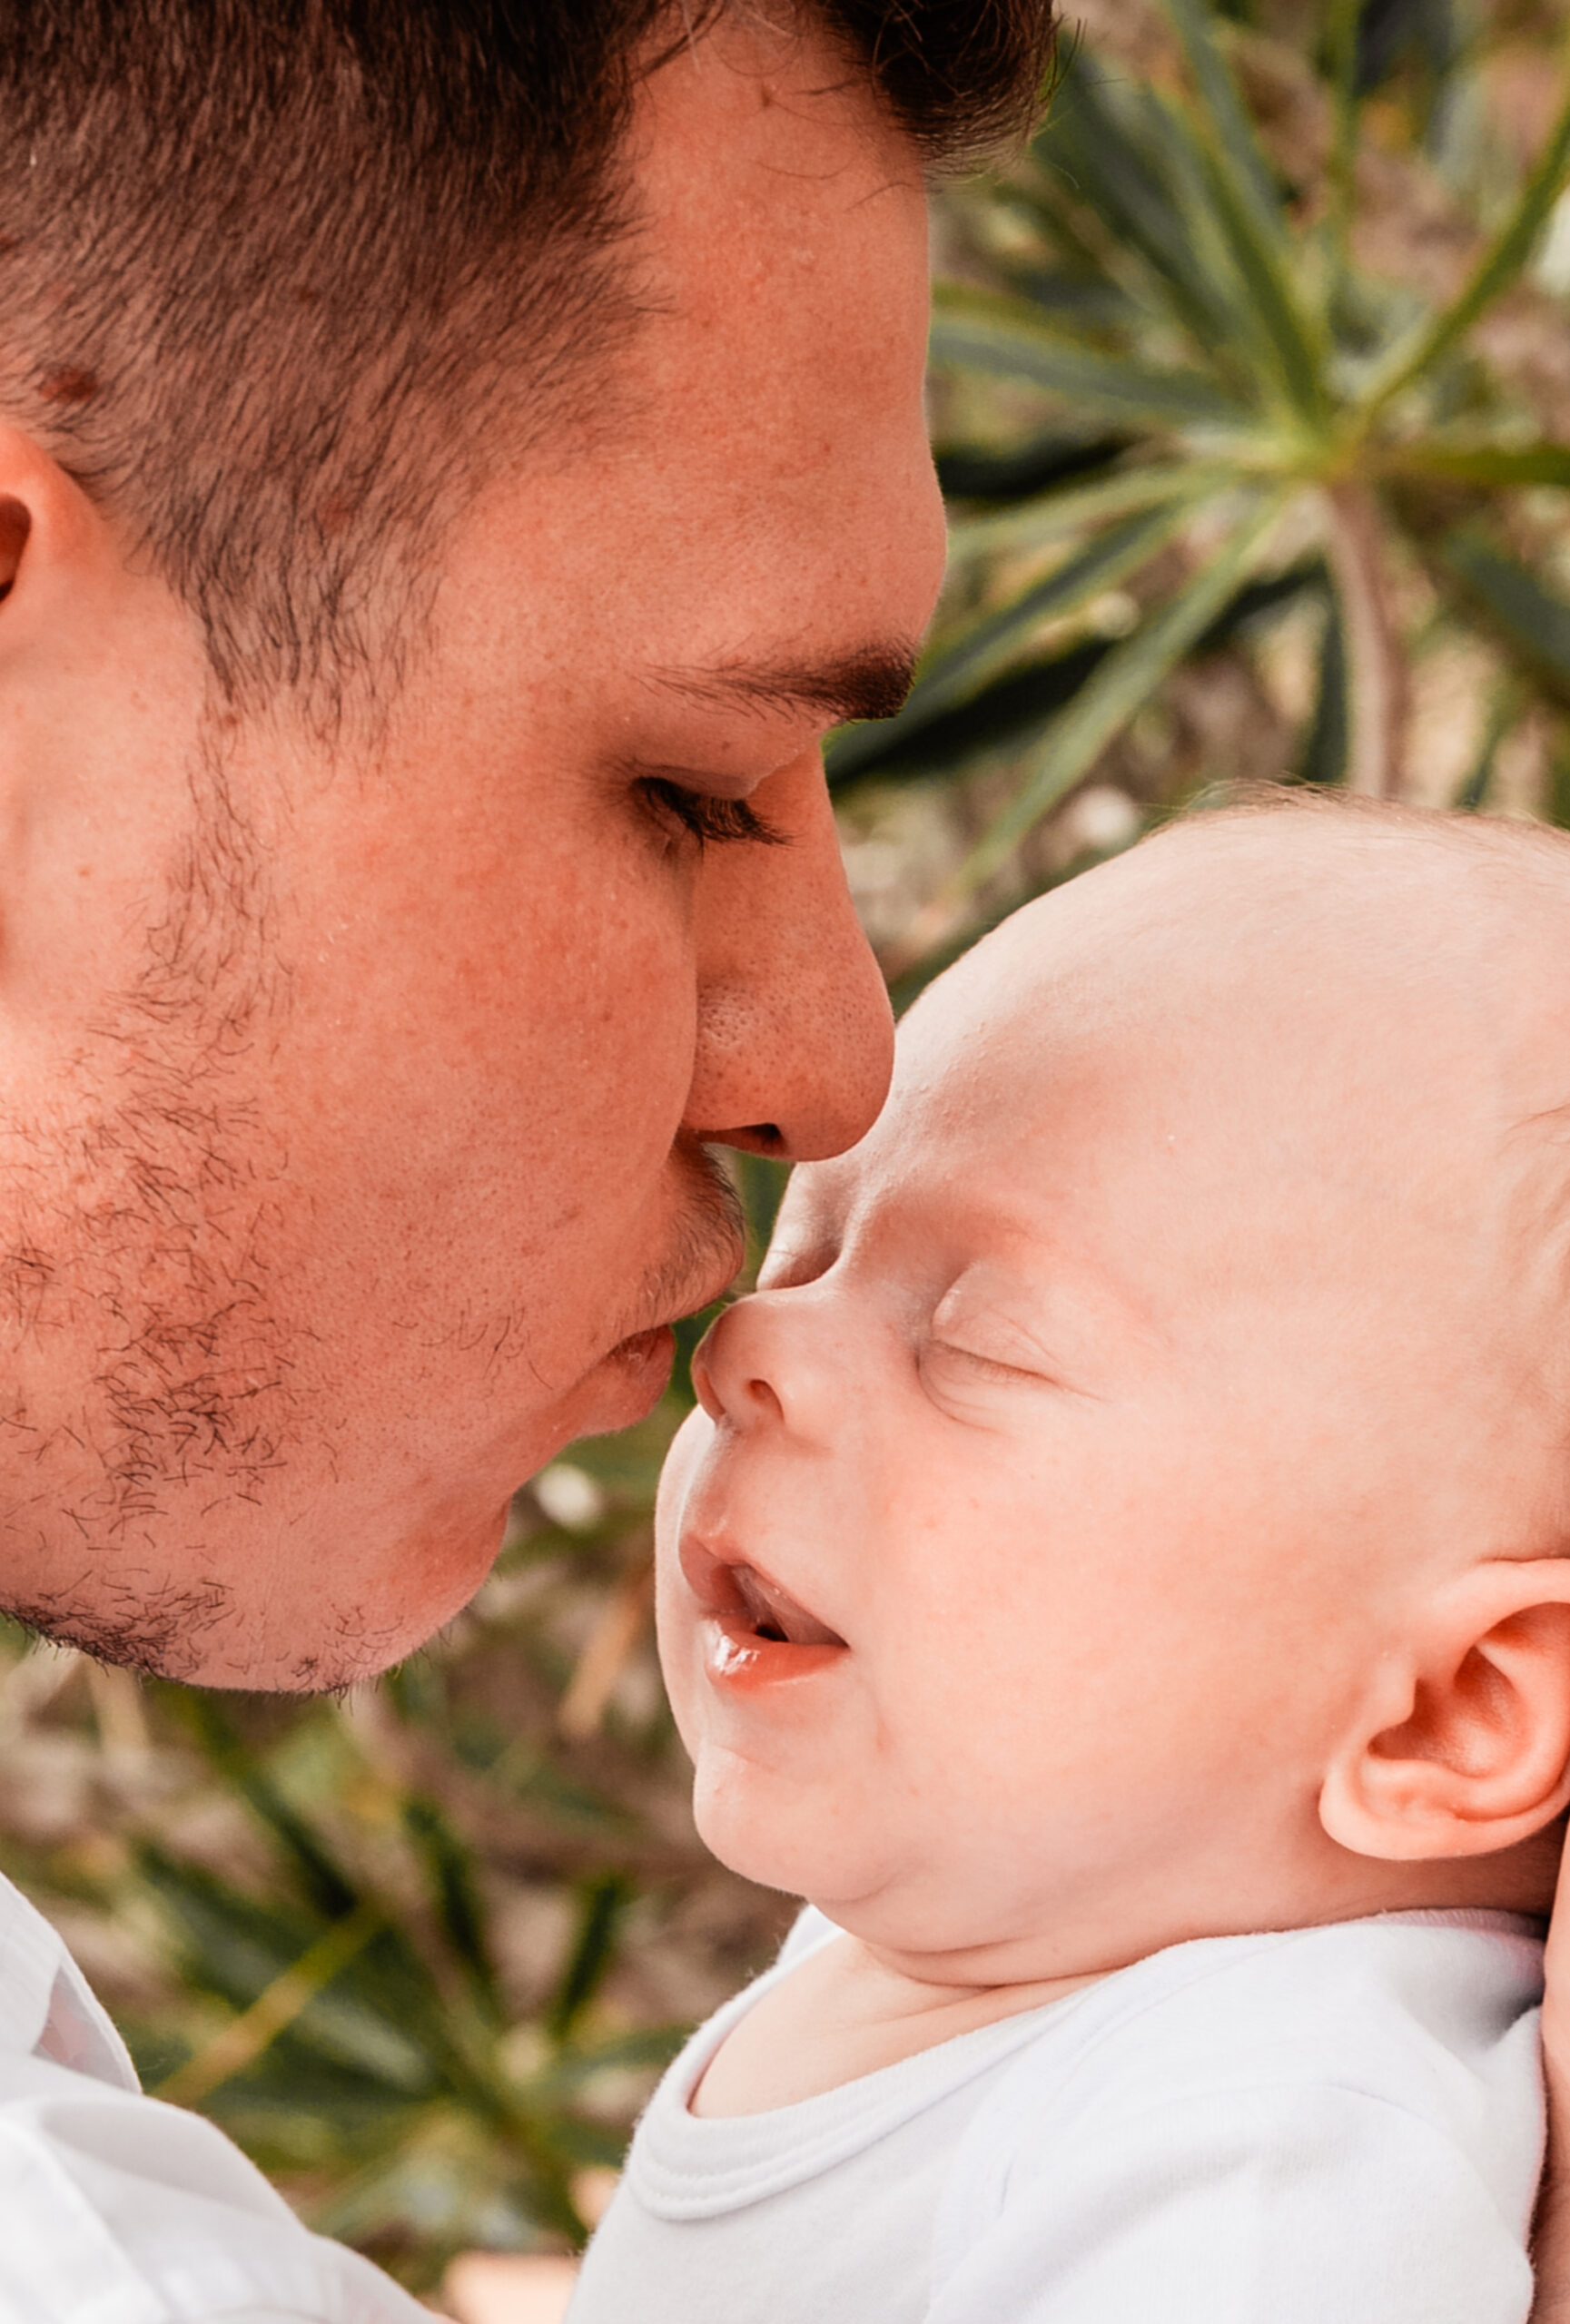 new dad kissing the noes of his newborn baby boy - newborn photography by Jamie Simmons